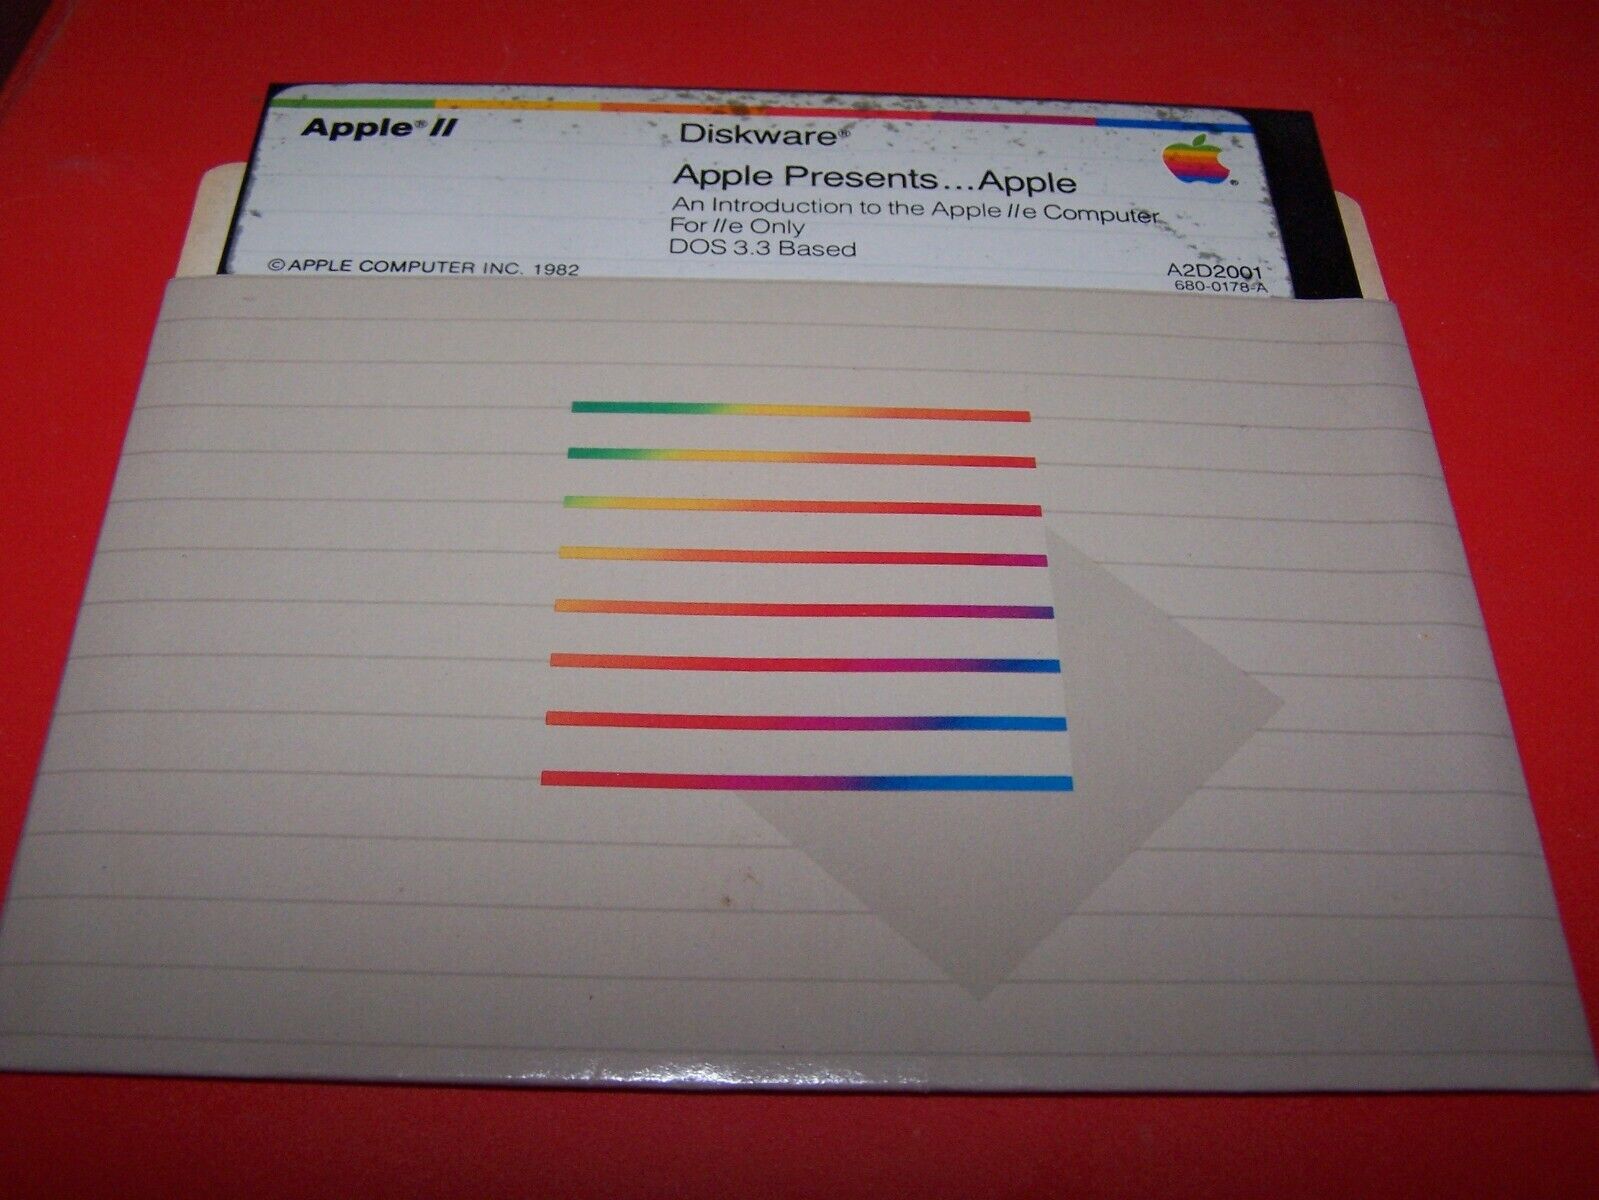 Apple Presents Apple Introduction to the Apple IIe Disk 680-0178-A